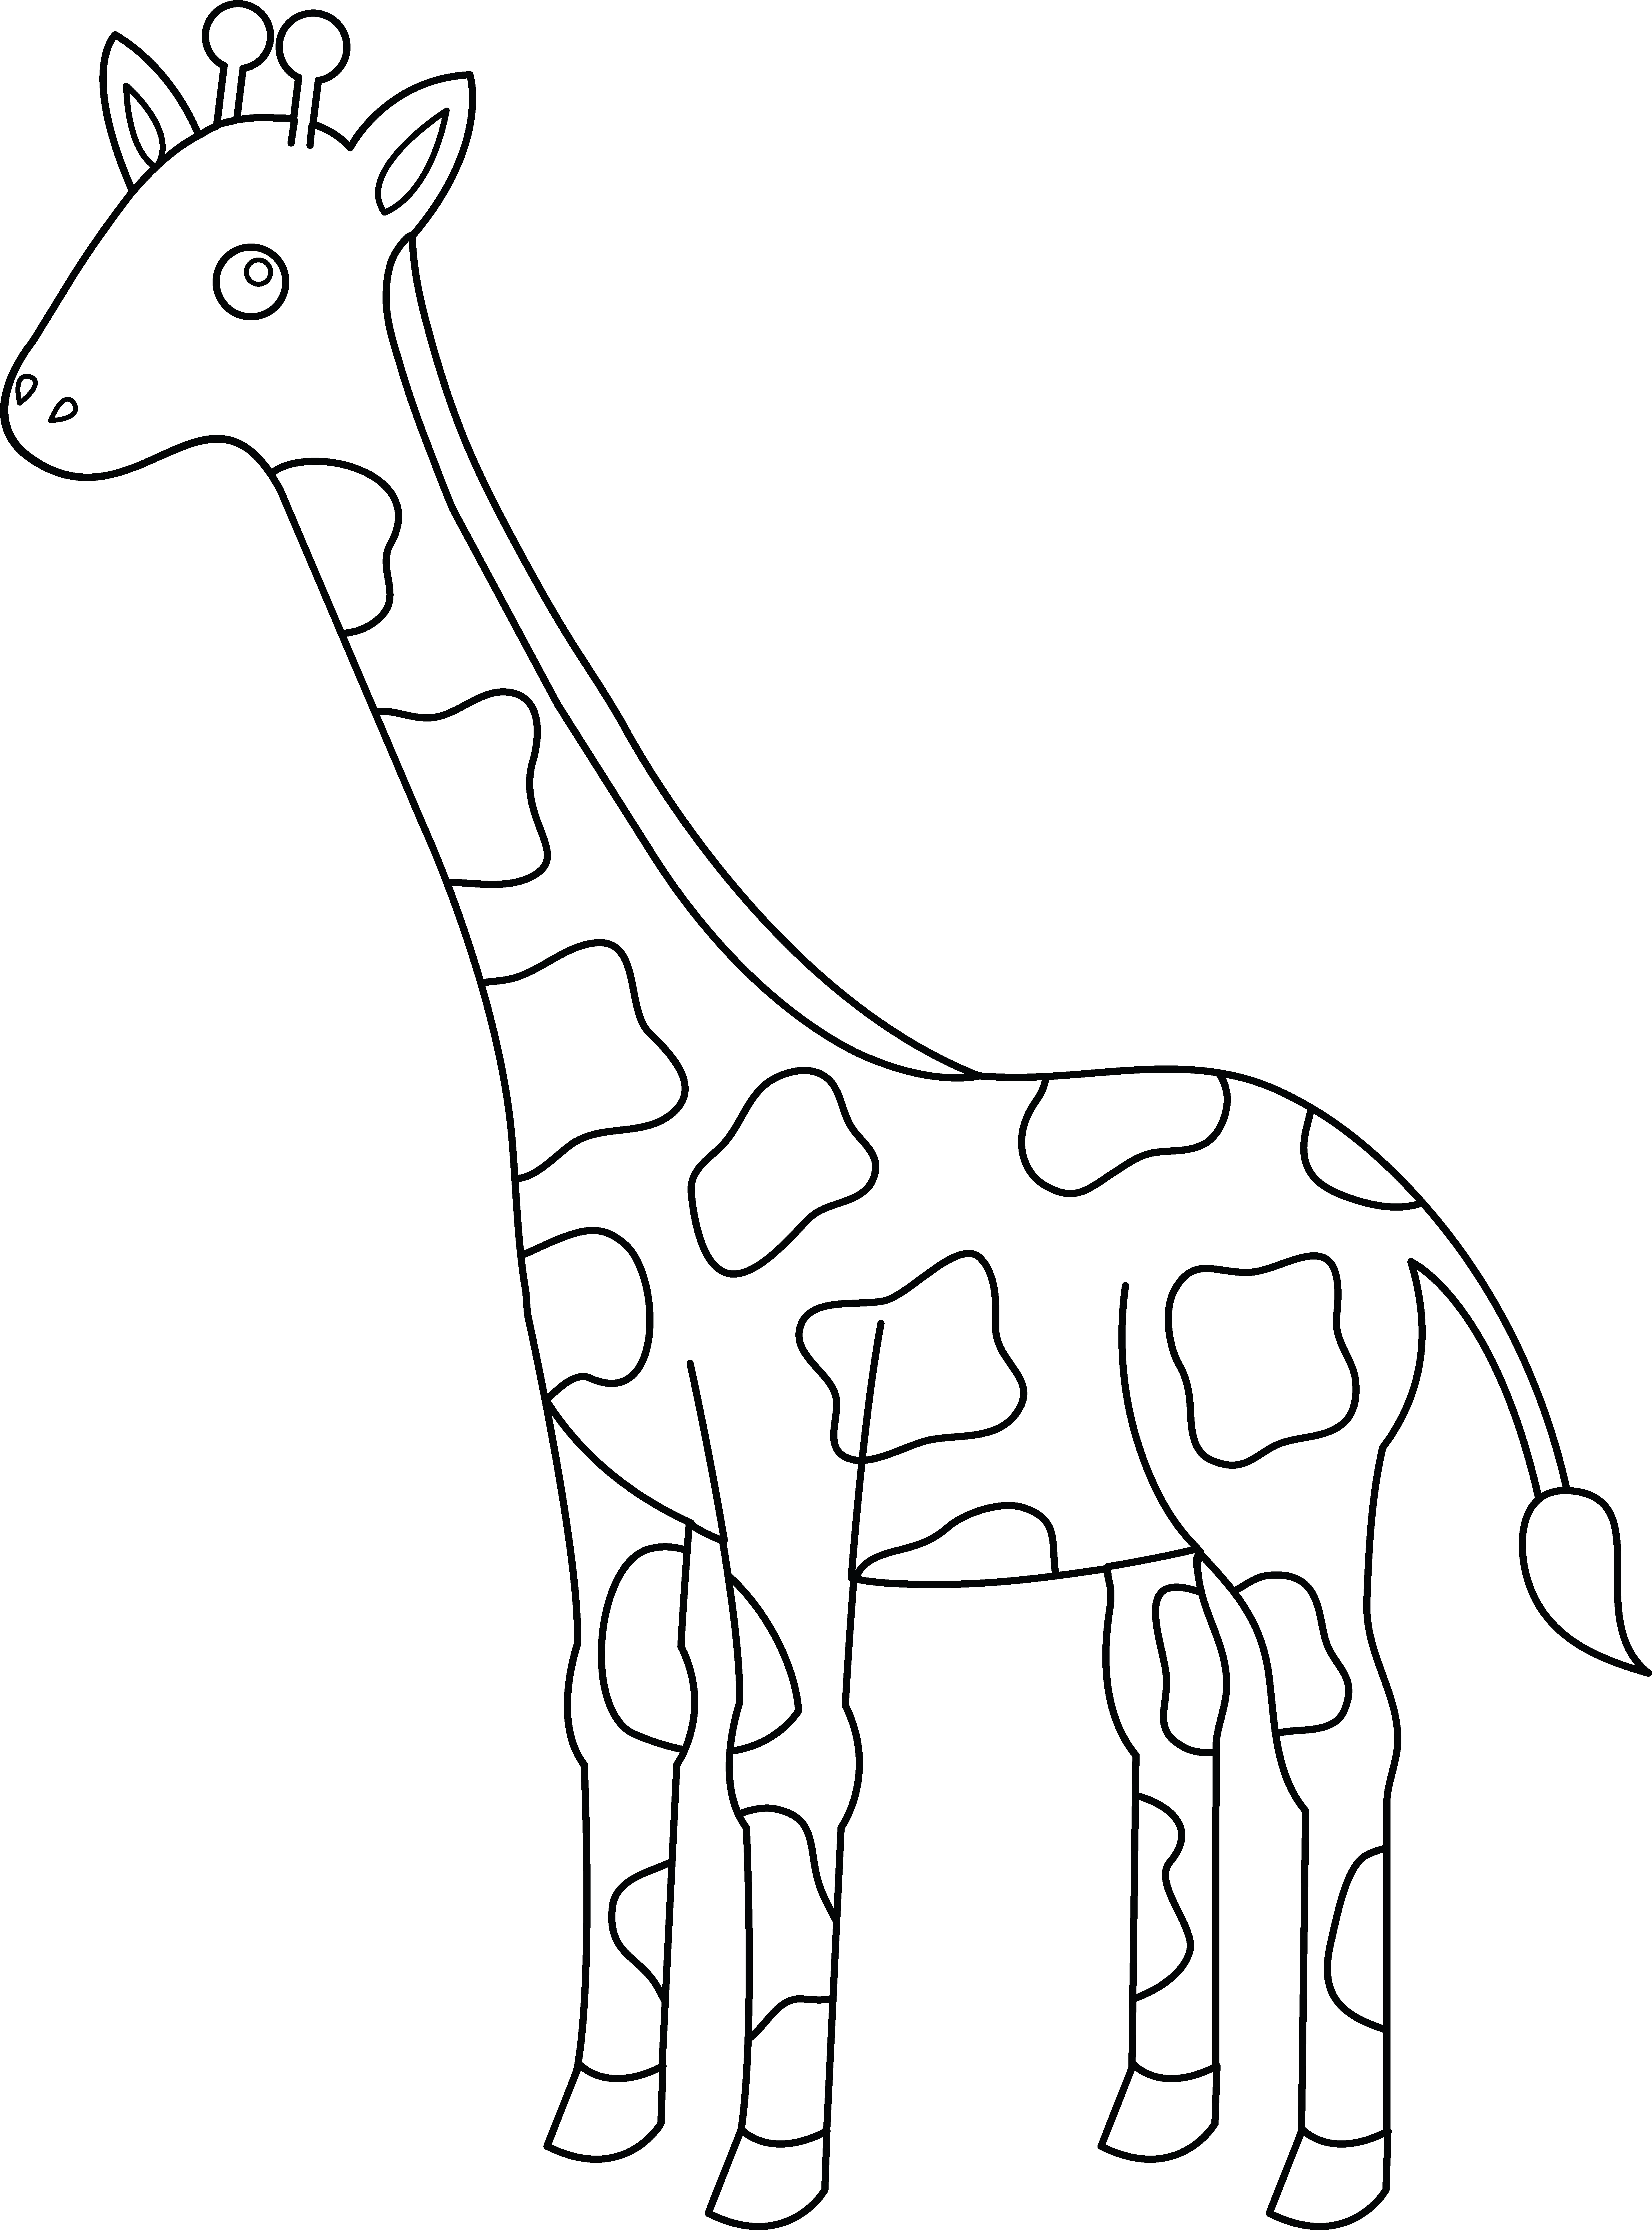 get-cute-coloring-pages-giraffe-background